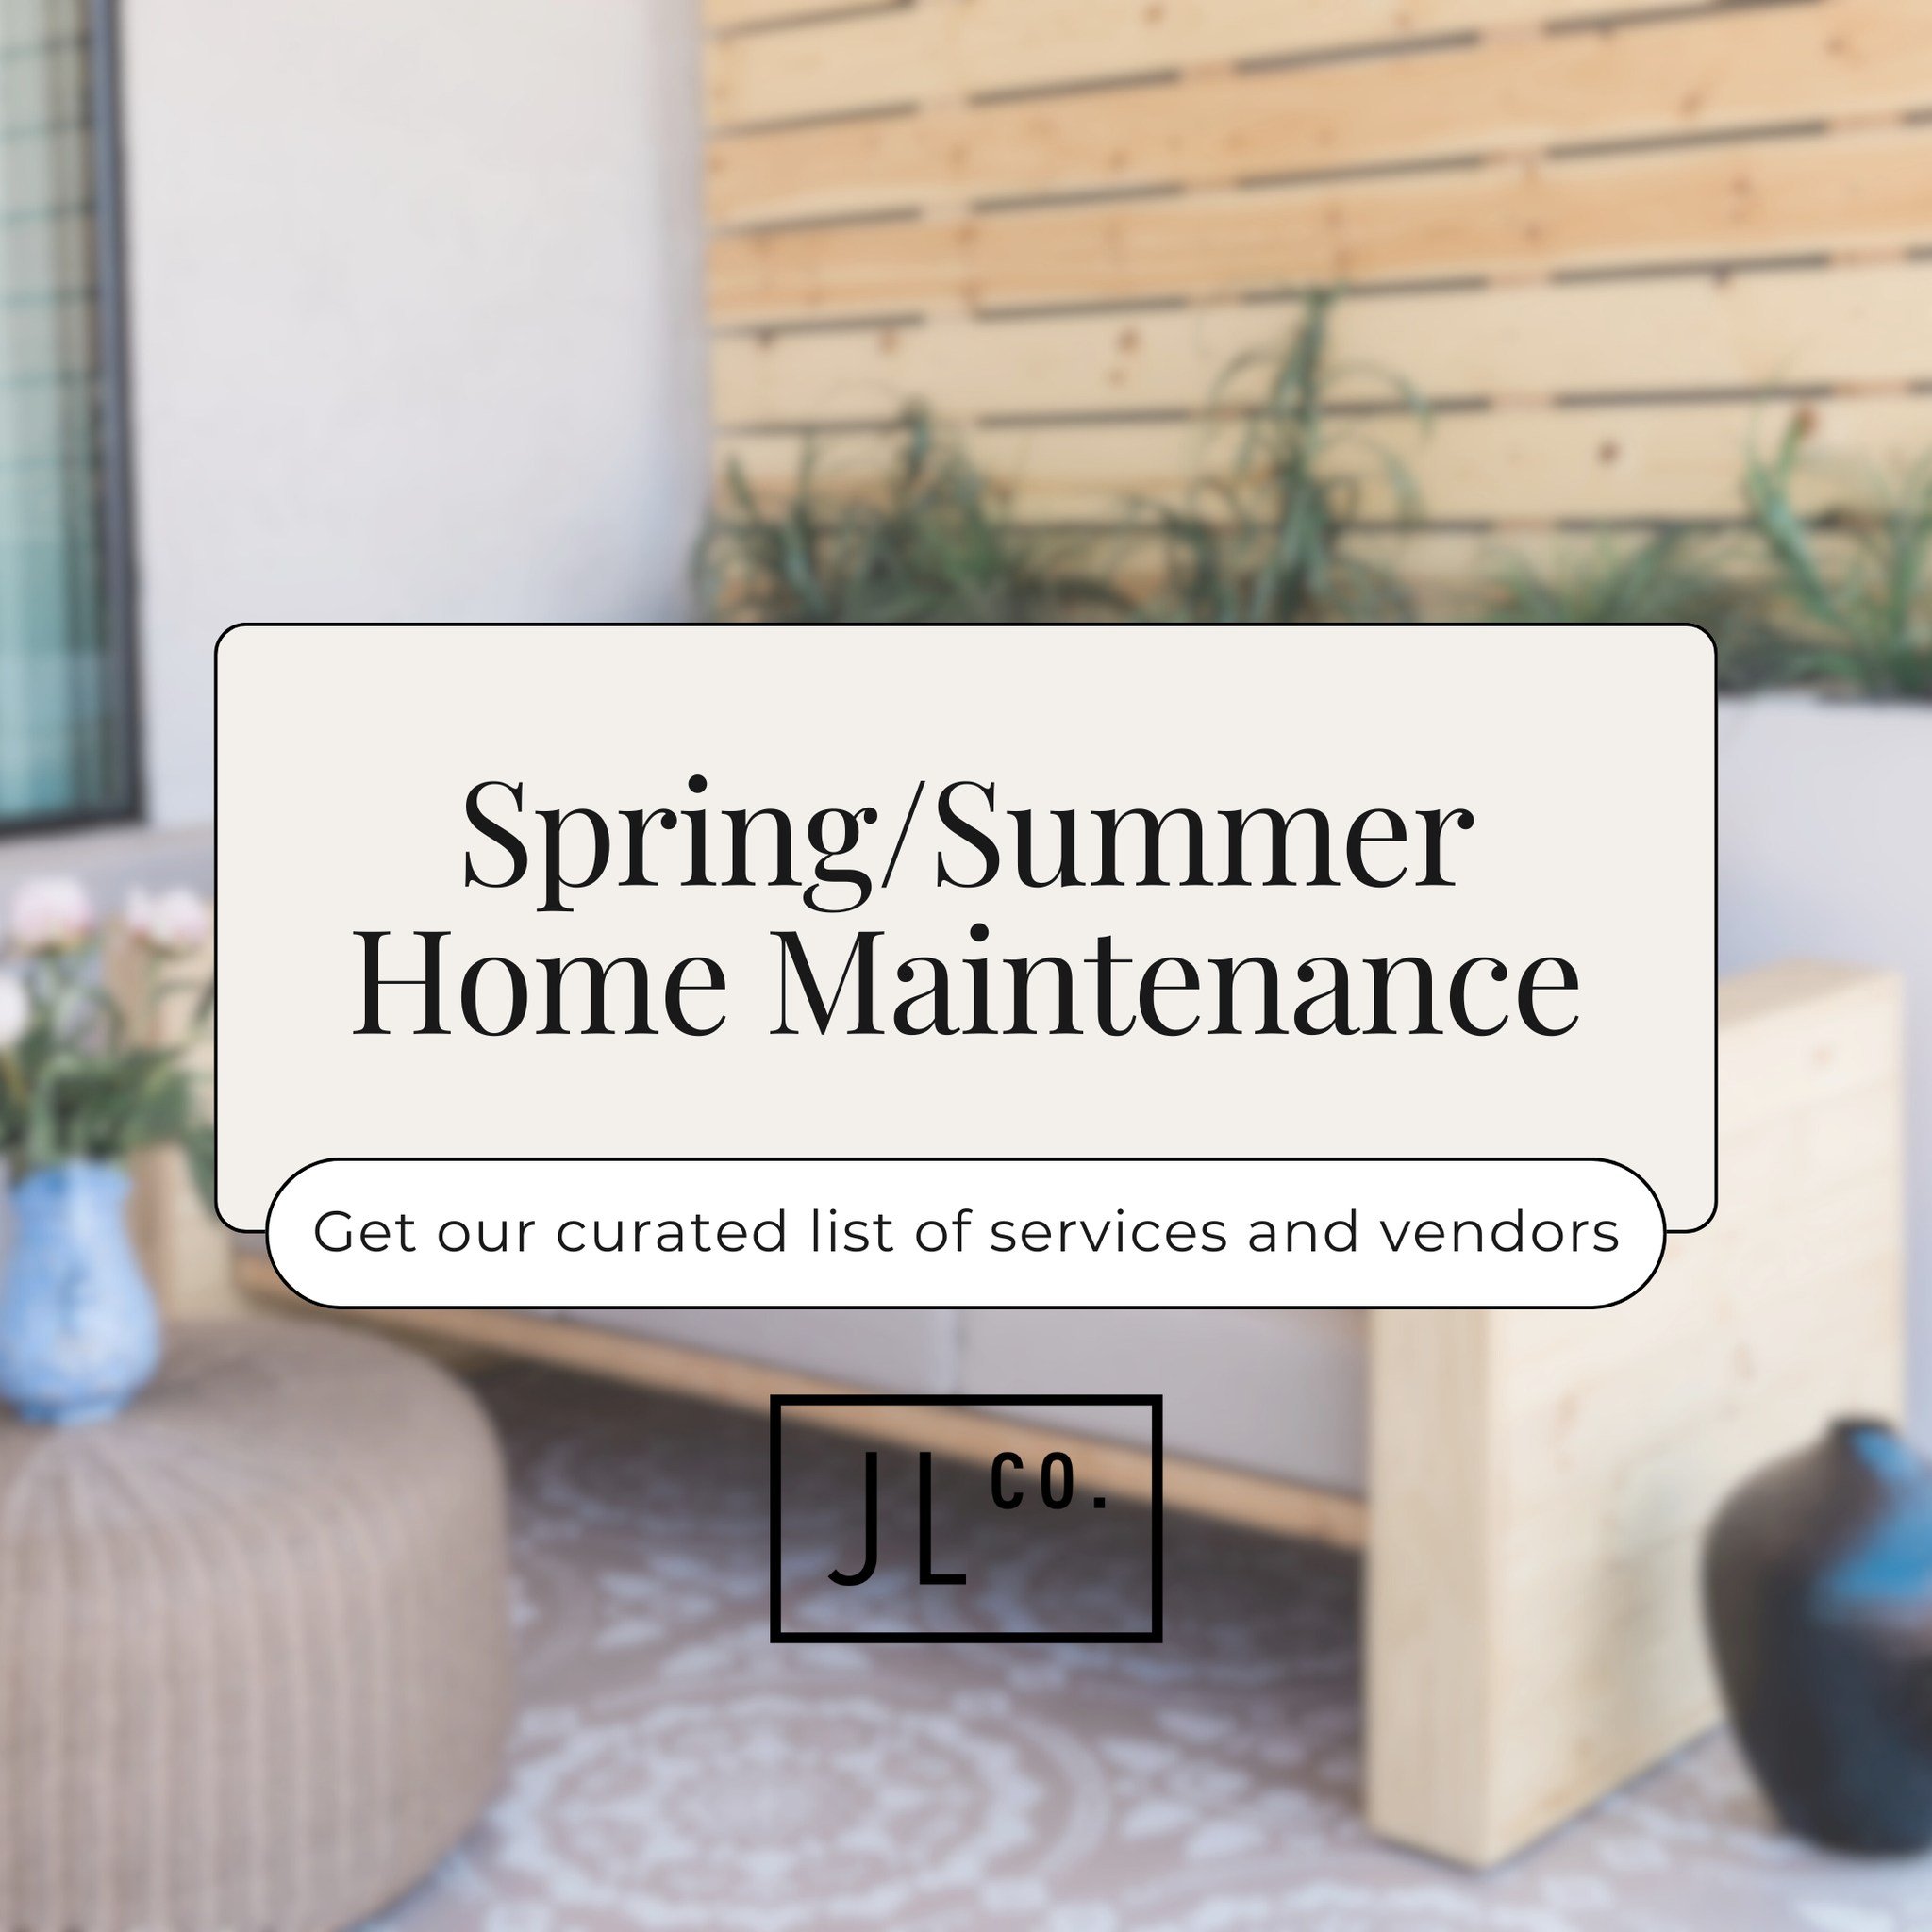 🌷🌞 Spring is here, and it's the perfect time to breathe new life into your outdoor spaces! Whether you're looking to refresh your lawn, clean up the exterior of your home, install a new fence, or revamp your landscaping and irrigation system, we've